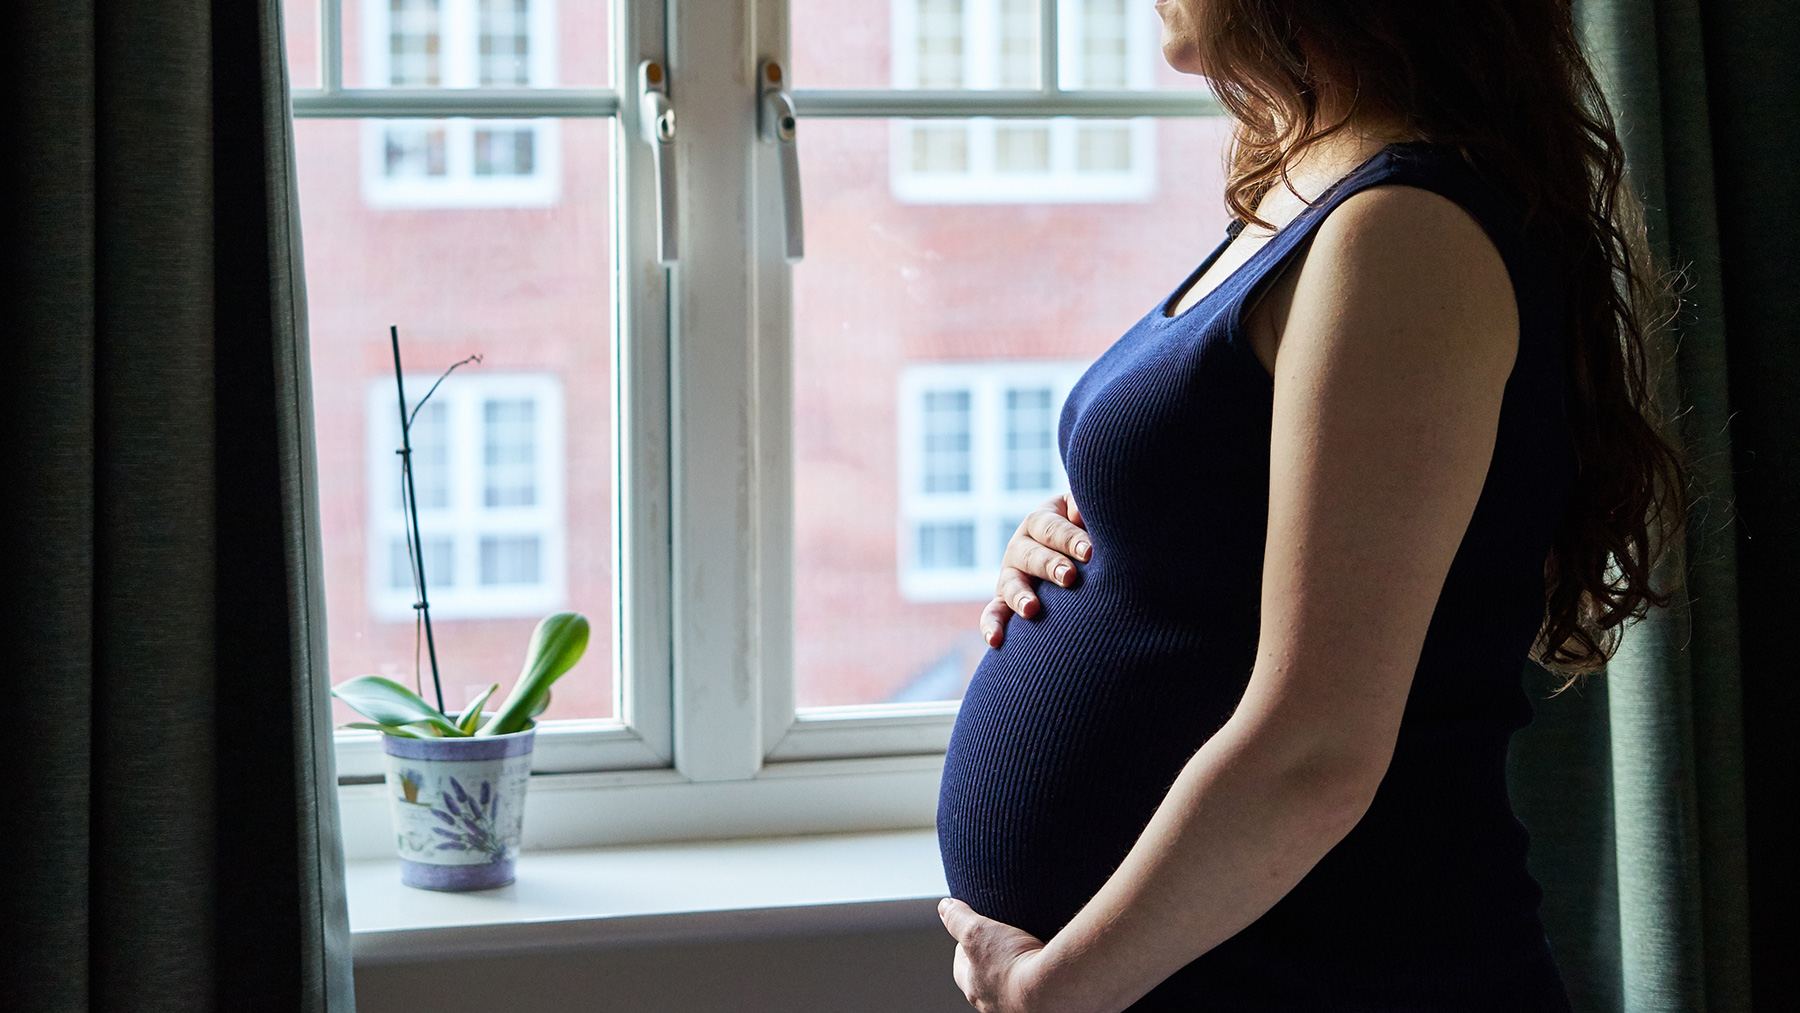 Pregnant woman holds her belly while looking out window